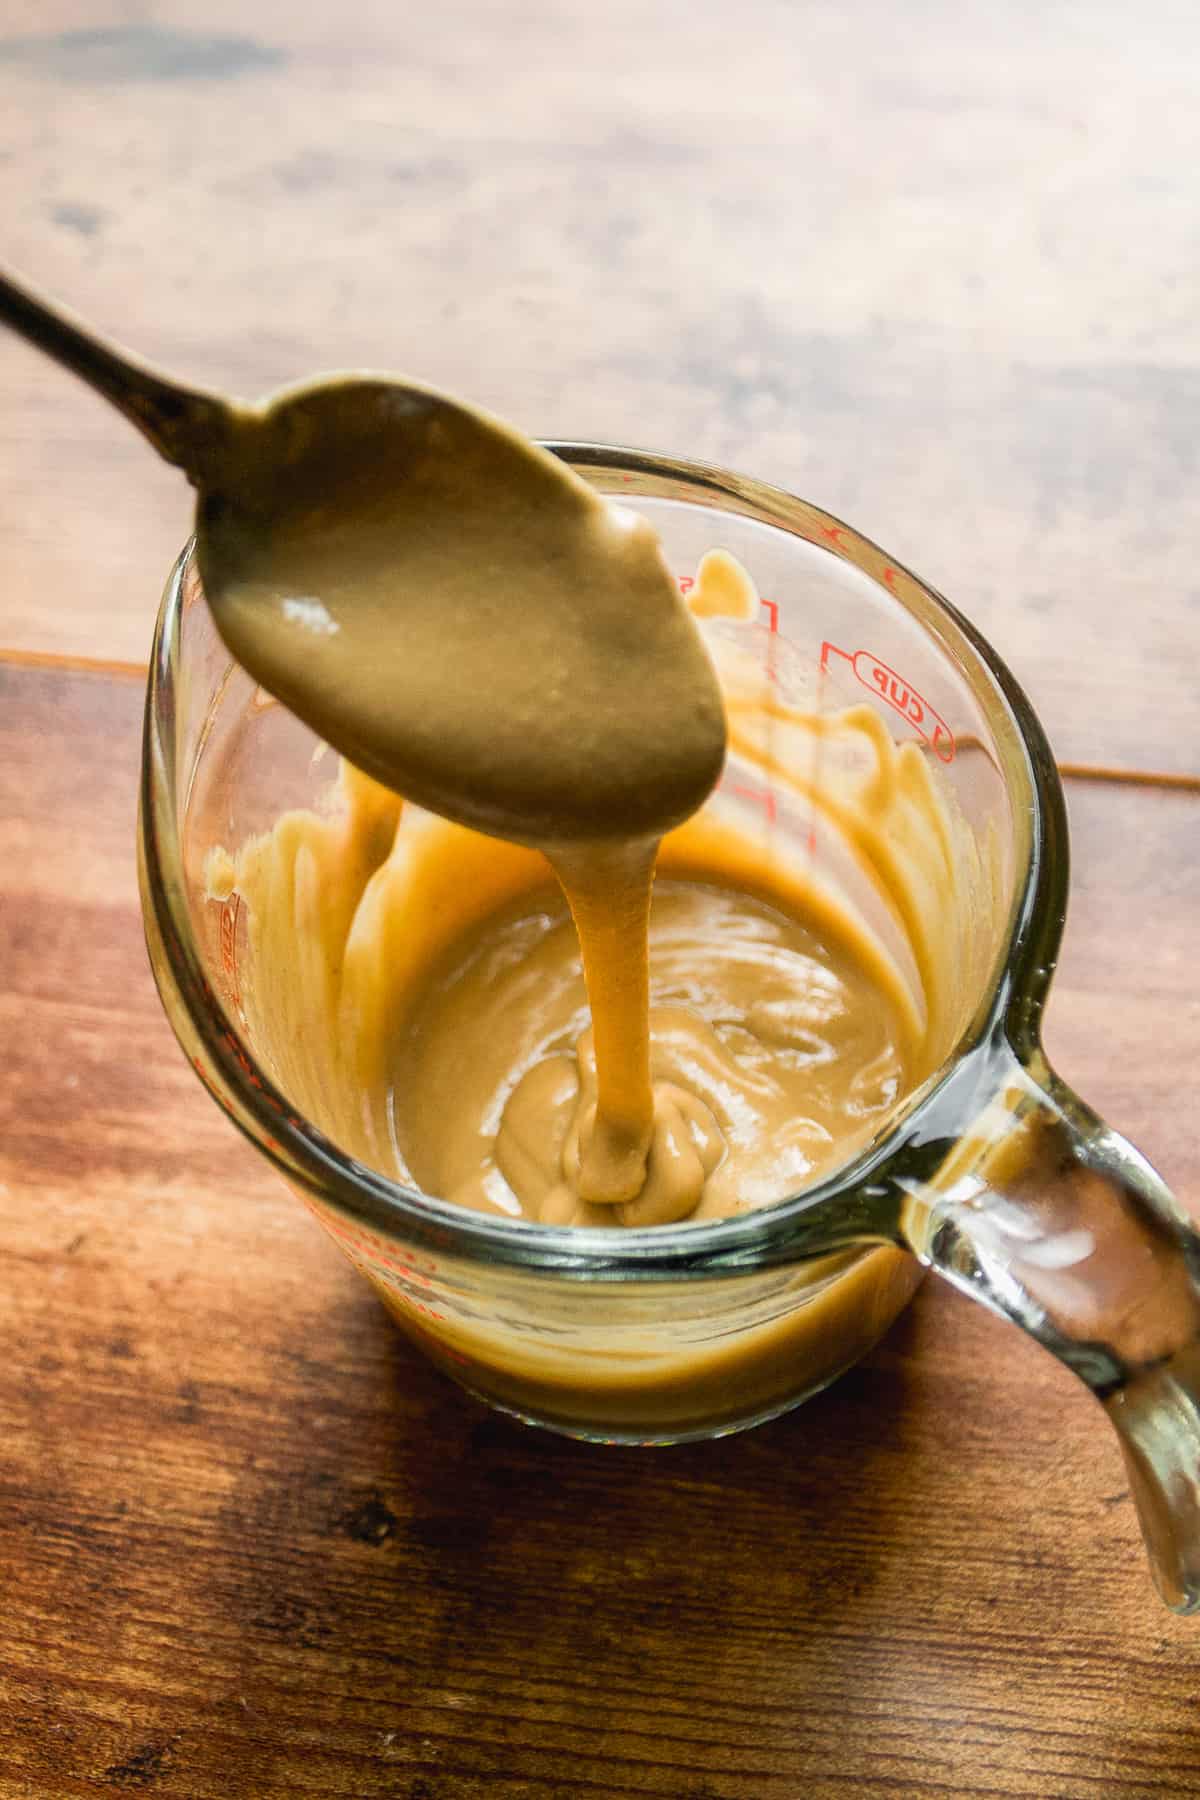 Tahini sauce dripping off a spoon into a glass.